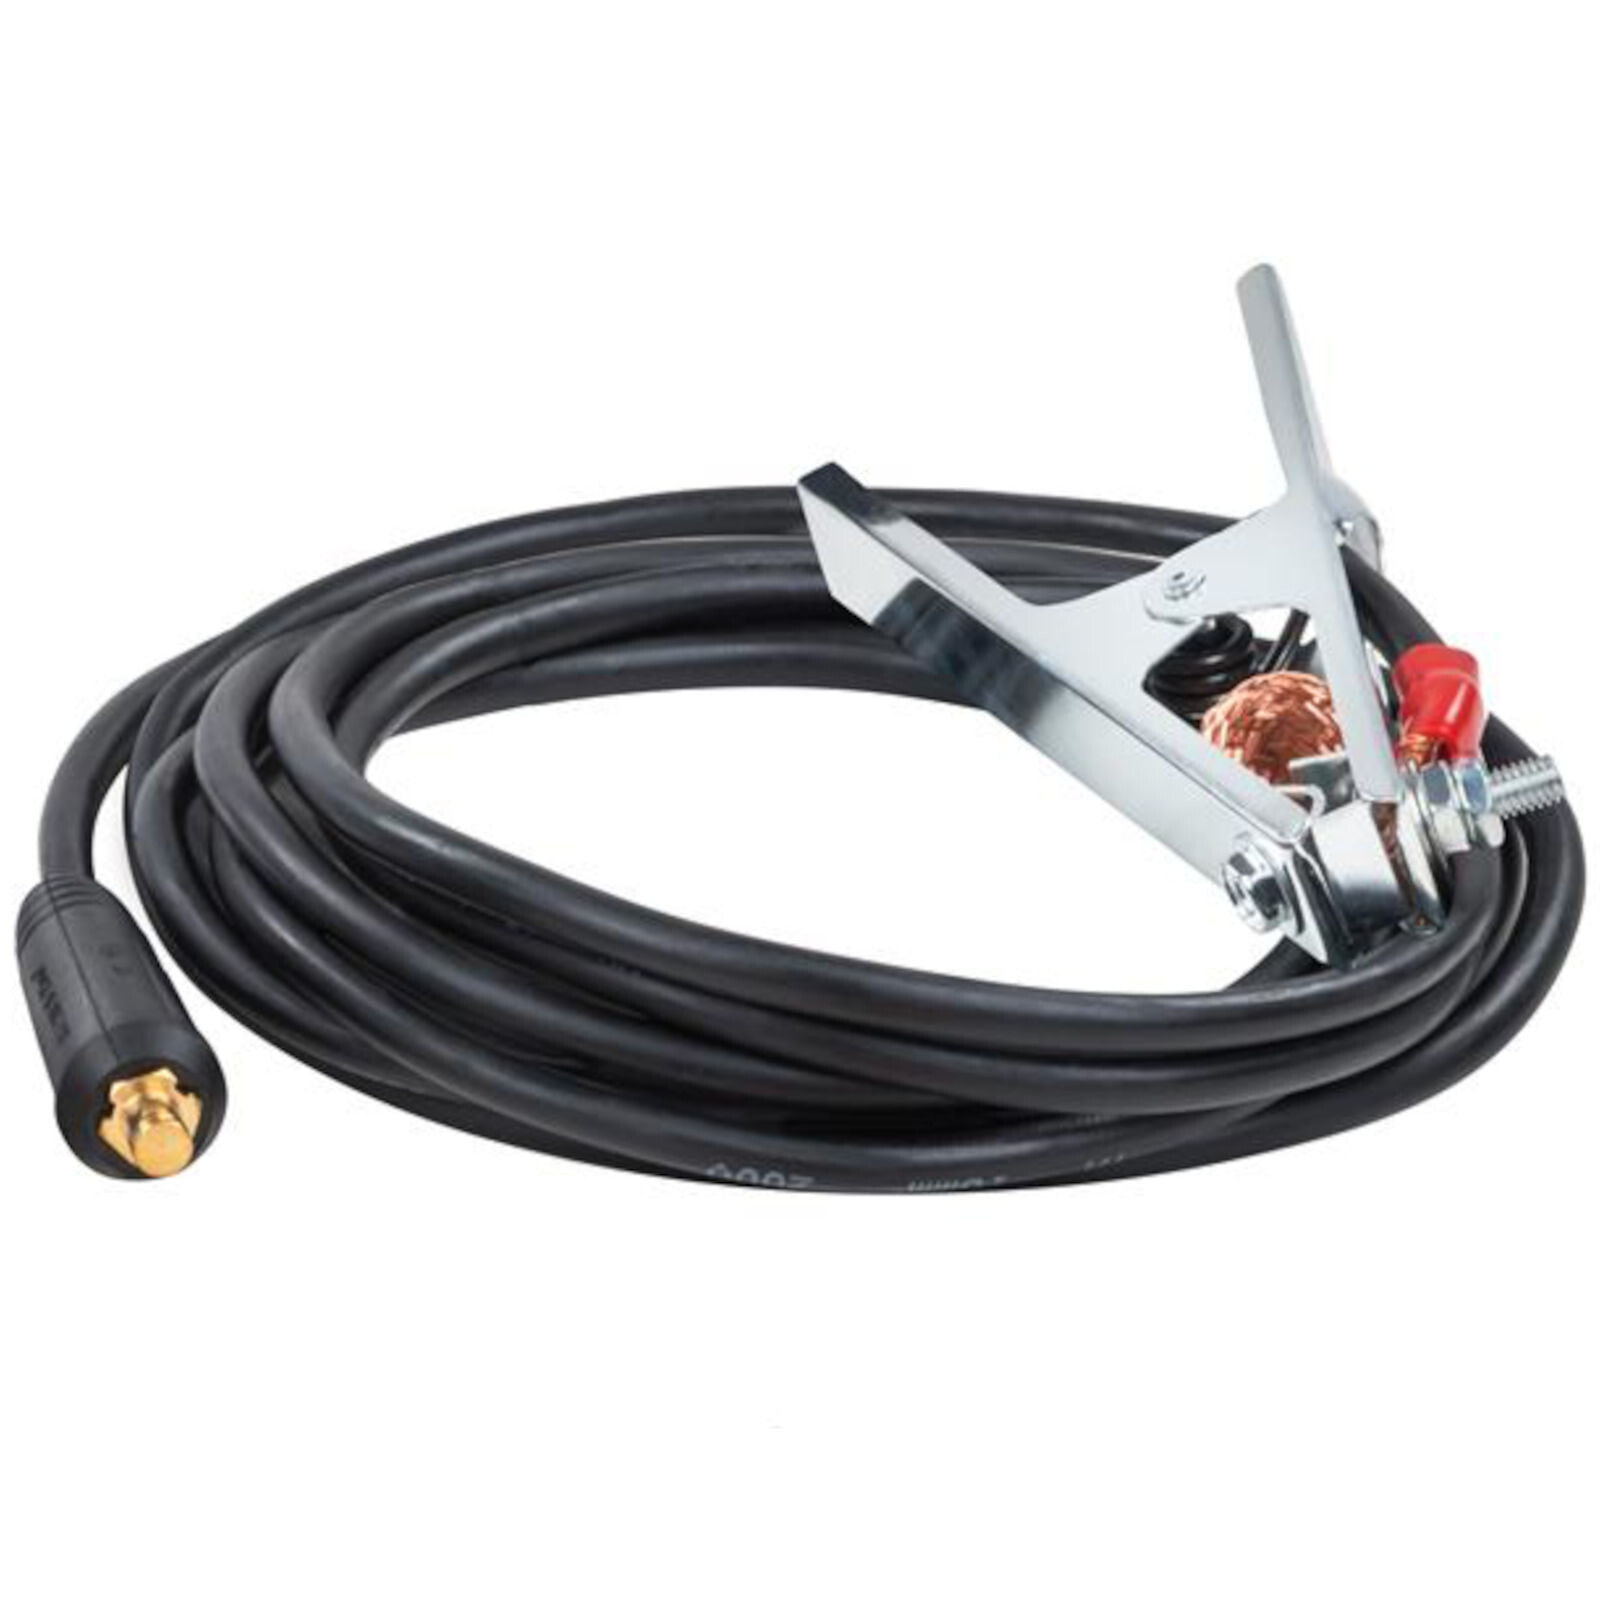 Ground cable with a clamp for 250A welders